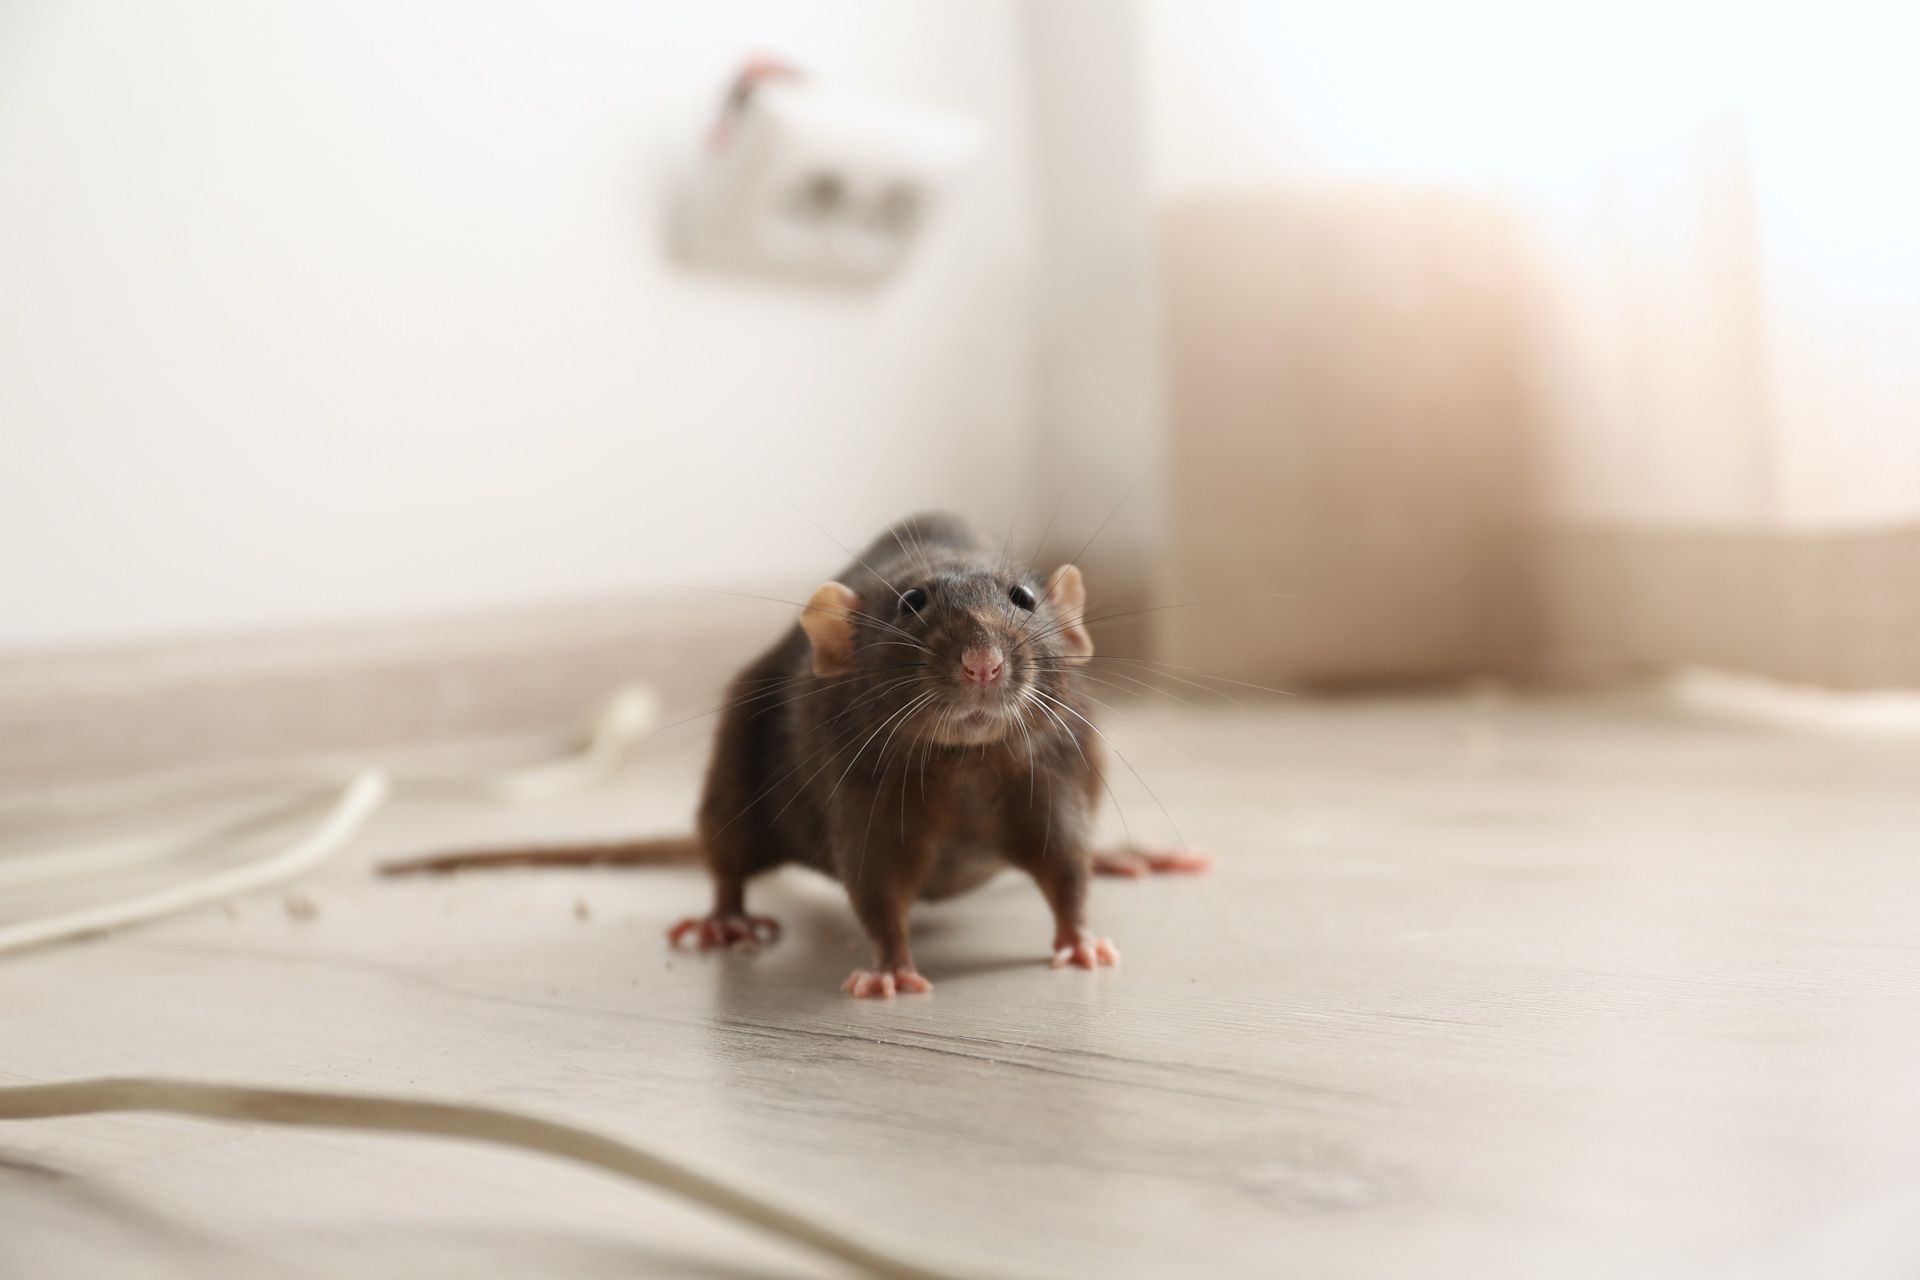 A rat is standing on a wooden floor in a room.